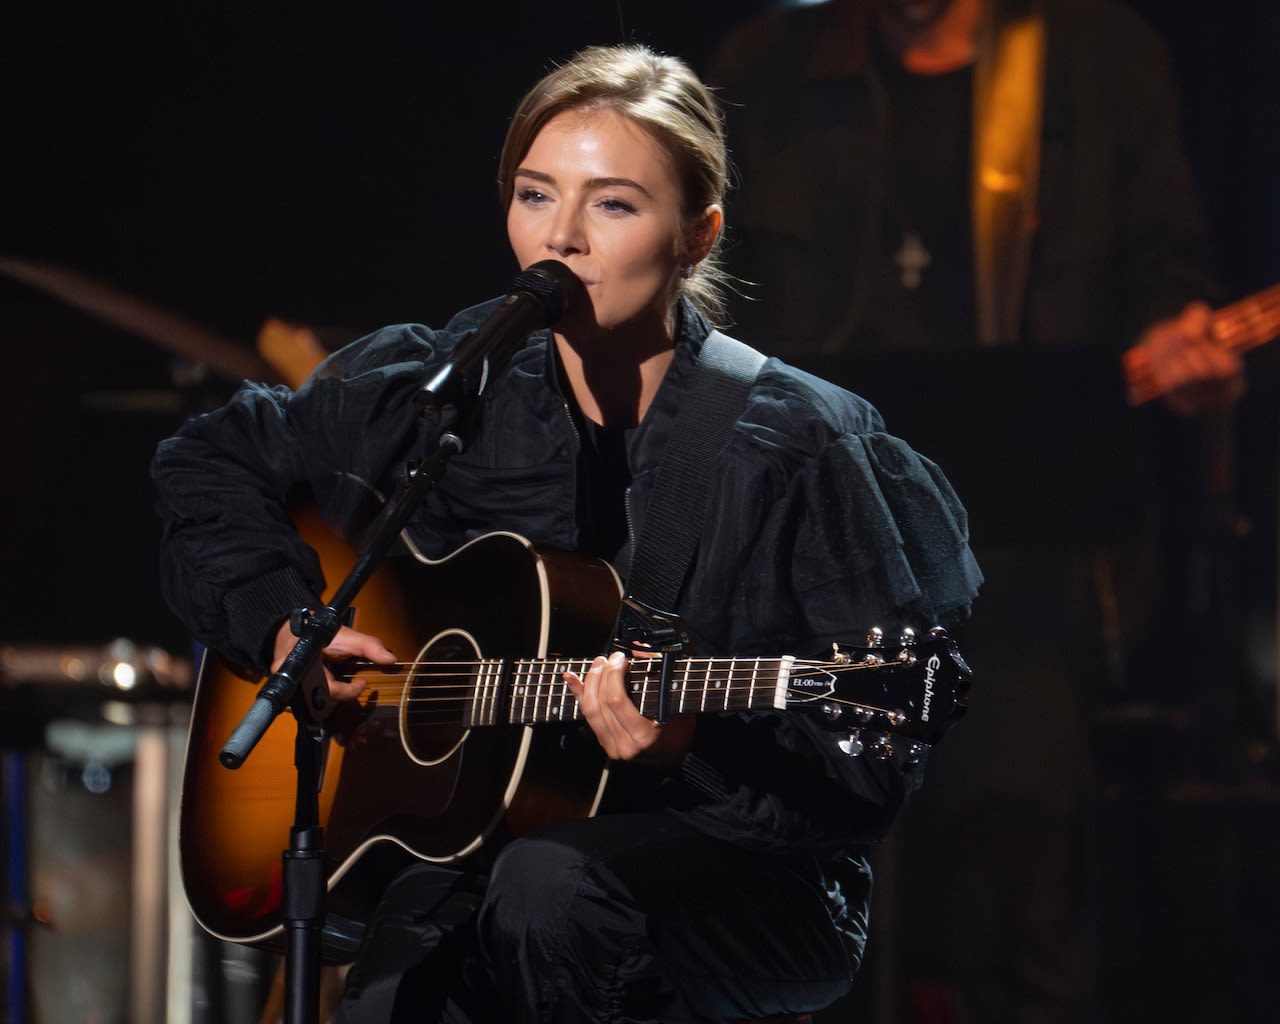 Country music legend’s granddaughter makes ‘American Idol’ top 5, prompting conspiracy theories